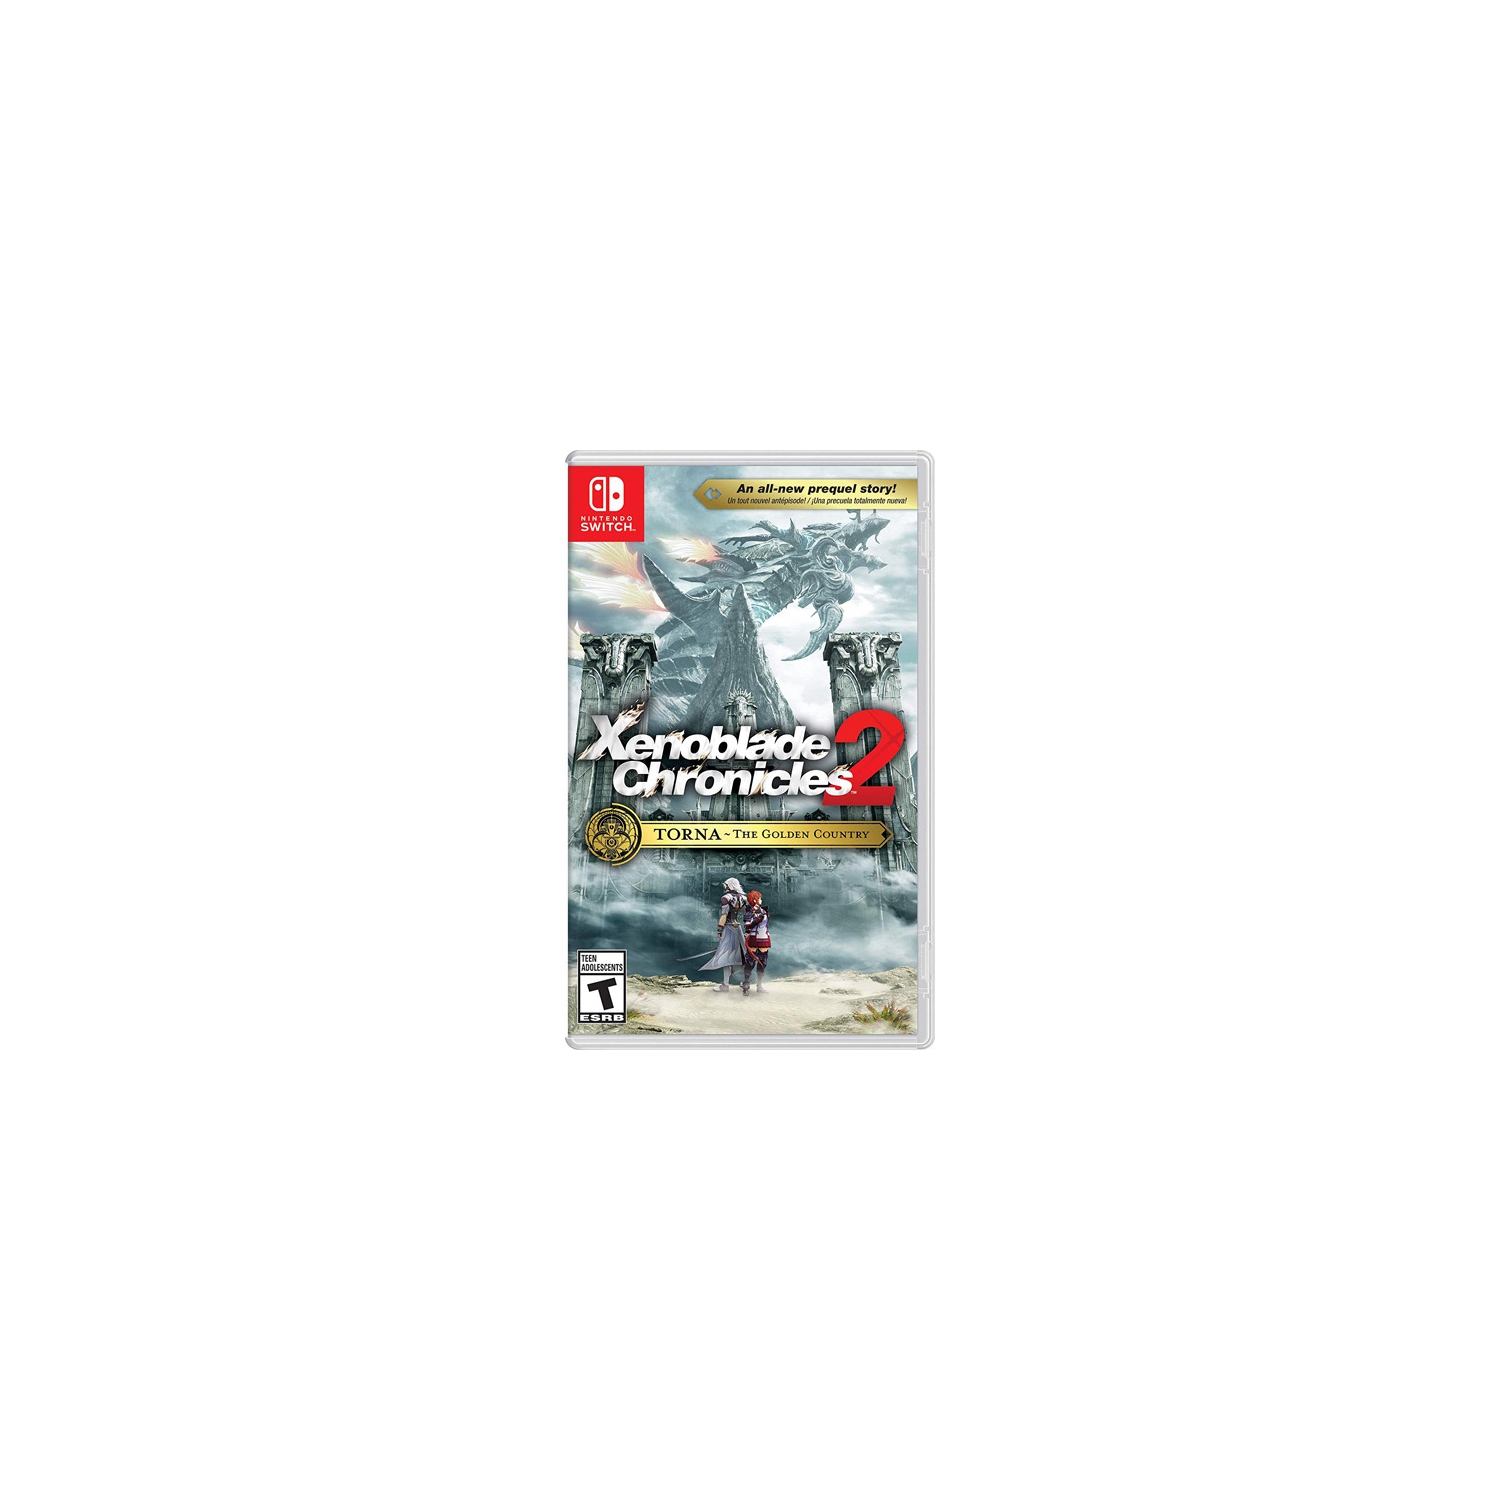 Xenoblade Chronicles 2 Torna The Golden Country (Ninendo Switch)